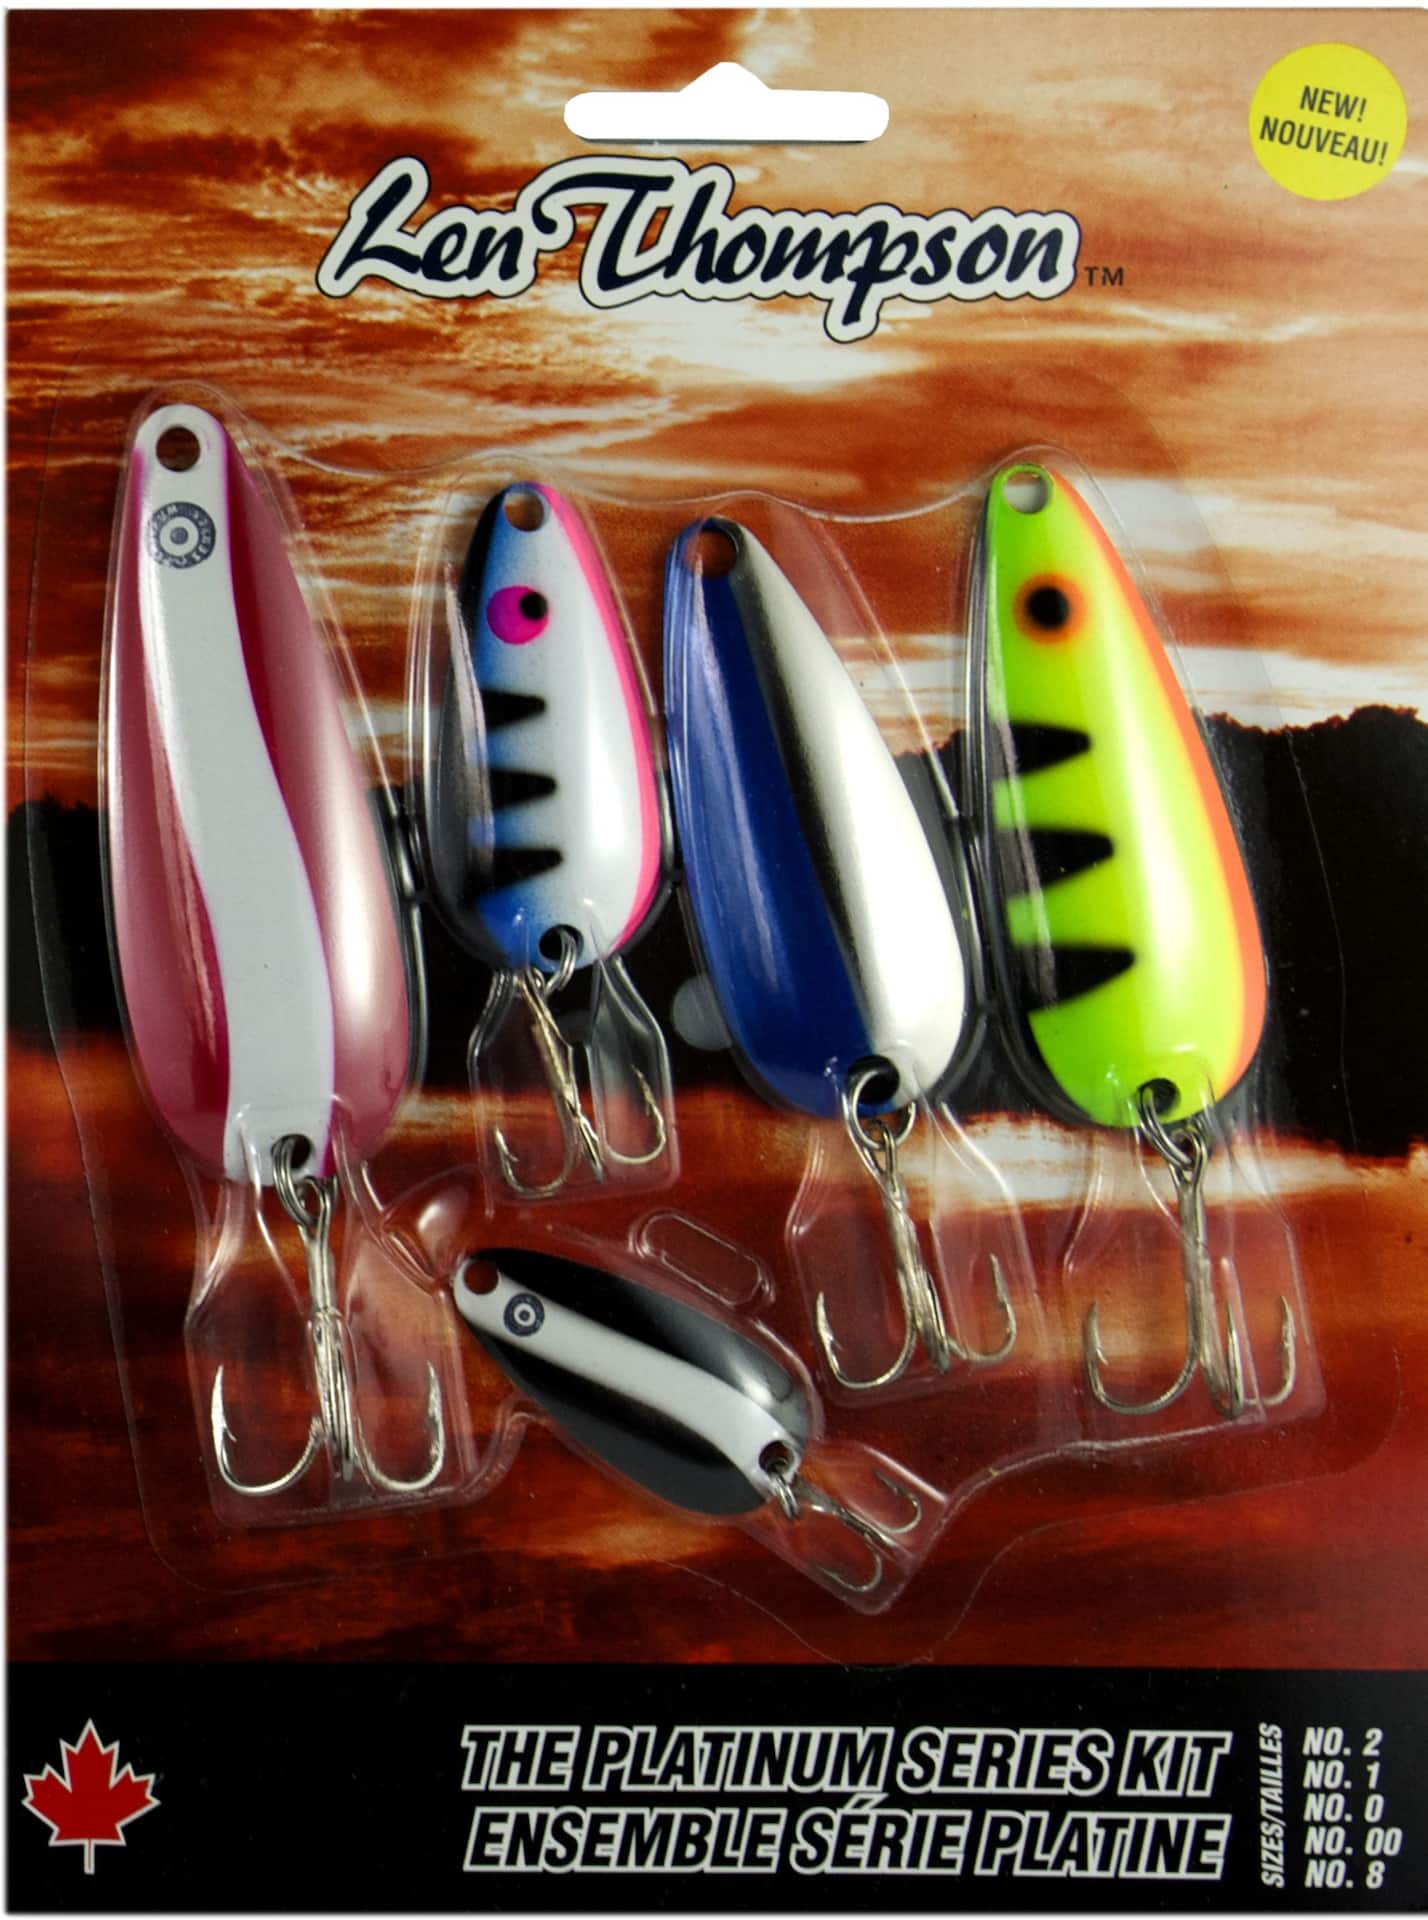 https://media-www.canadiantire.ca/product/playing/fishing/fishing-lures/0773715/len-thompson-platinum-series-assorted-5-pack-227ae1e4-054b-4648-9921-d2daa68f9a58-jpgrendition.jpg